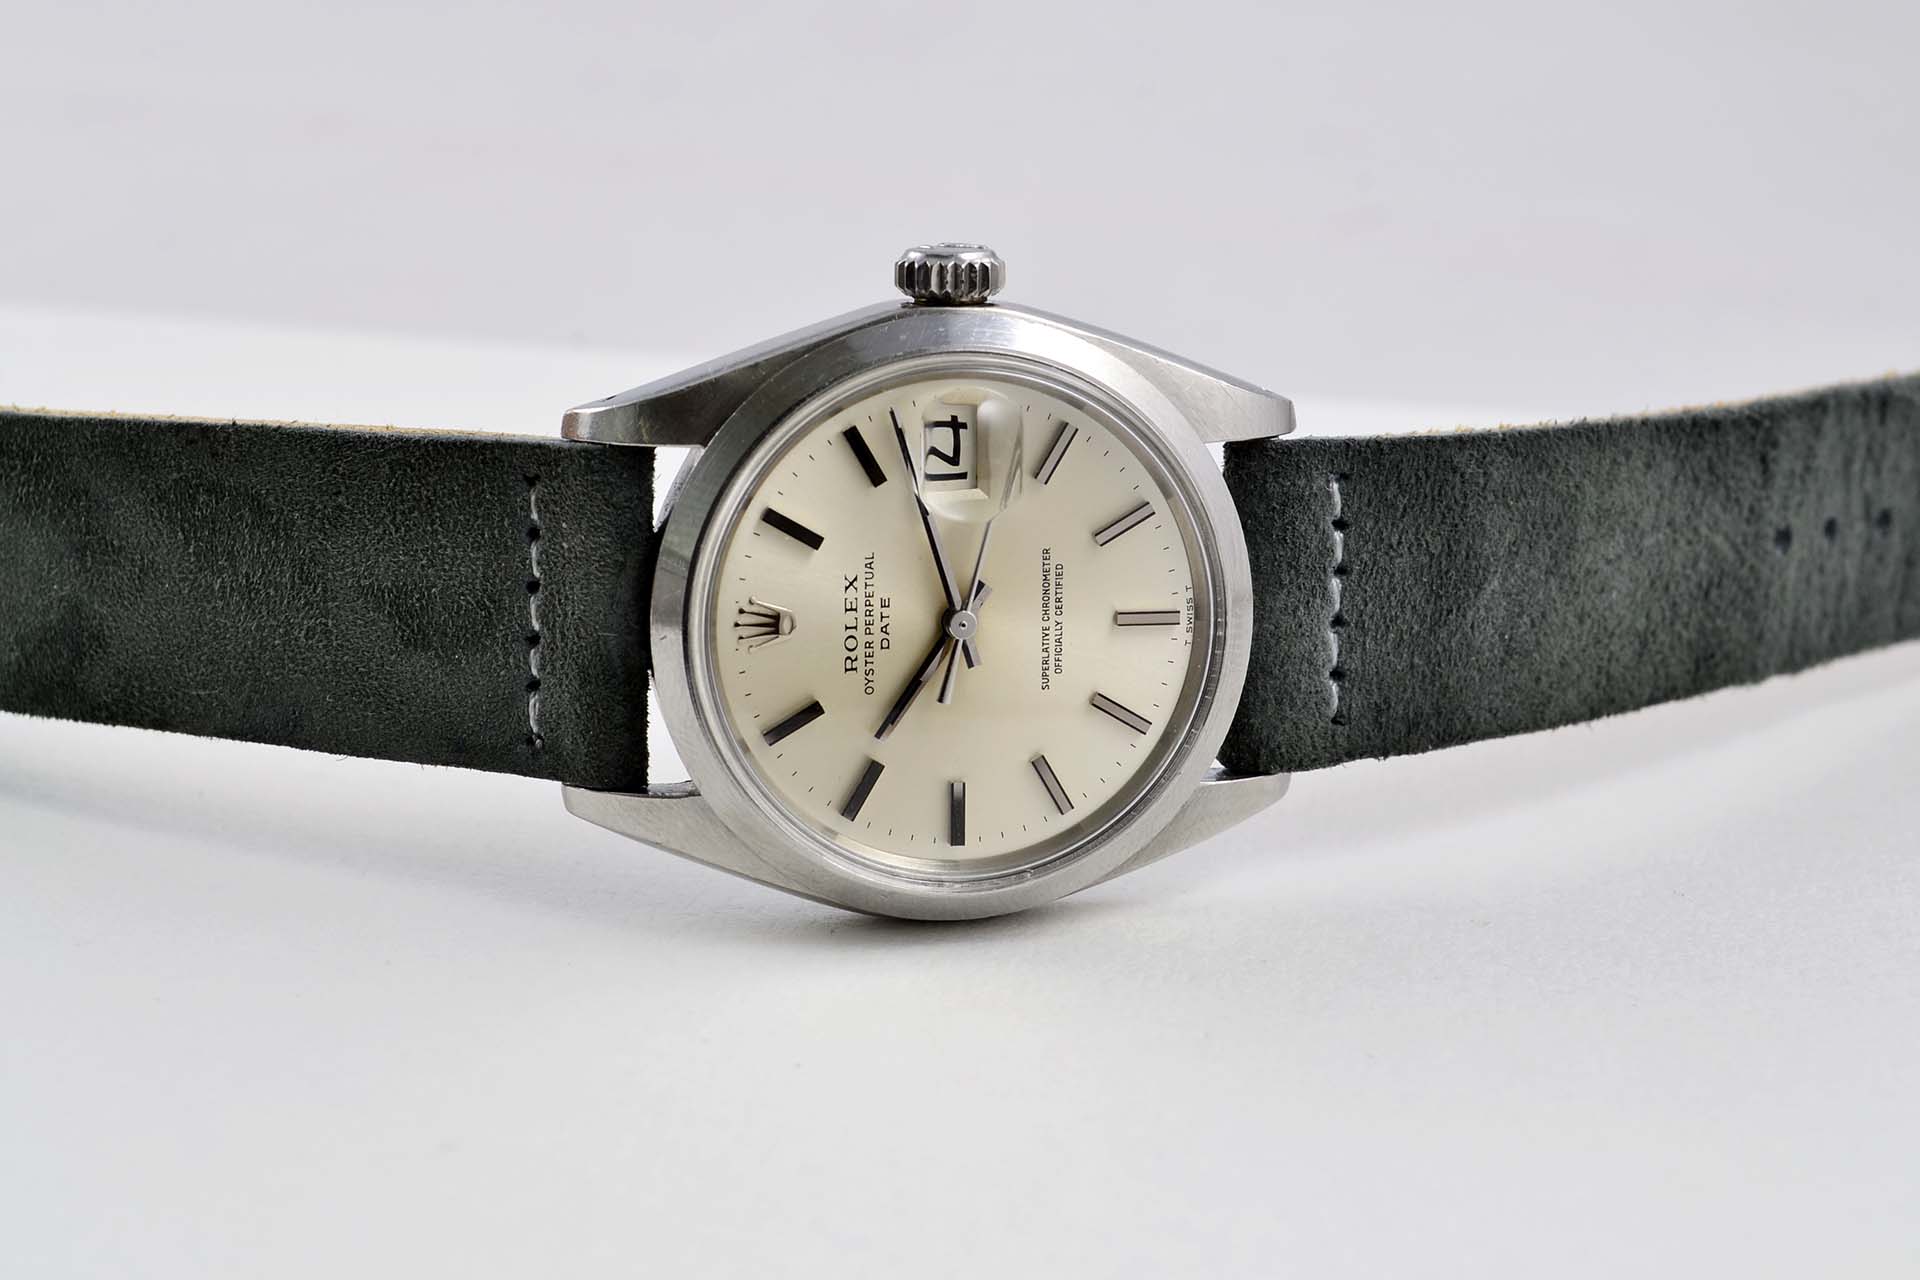 Rolex 1500 Oyster Perpetual Date - 1972 - LumeVille